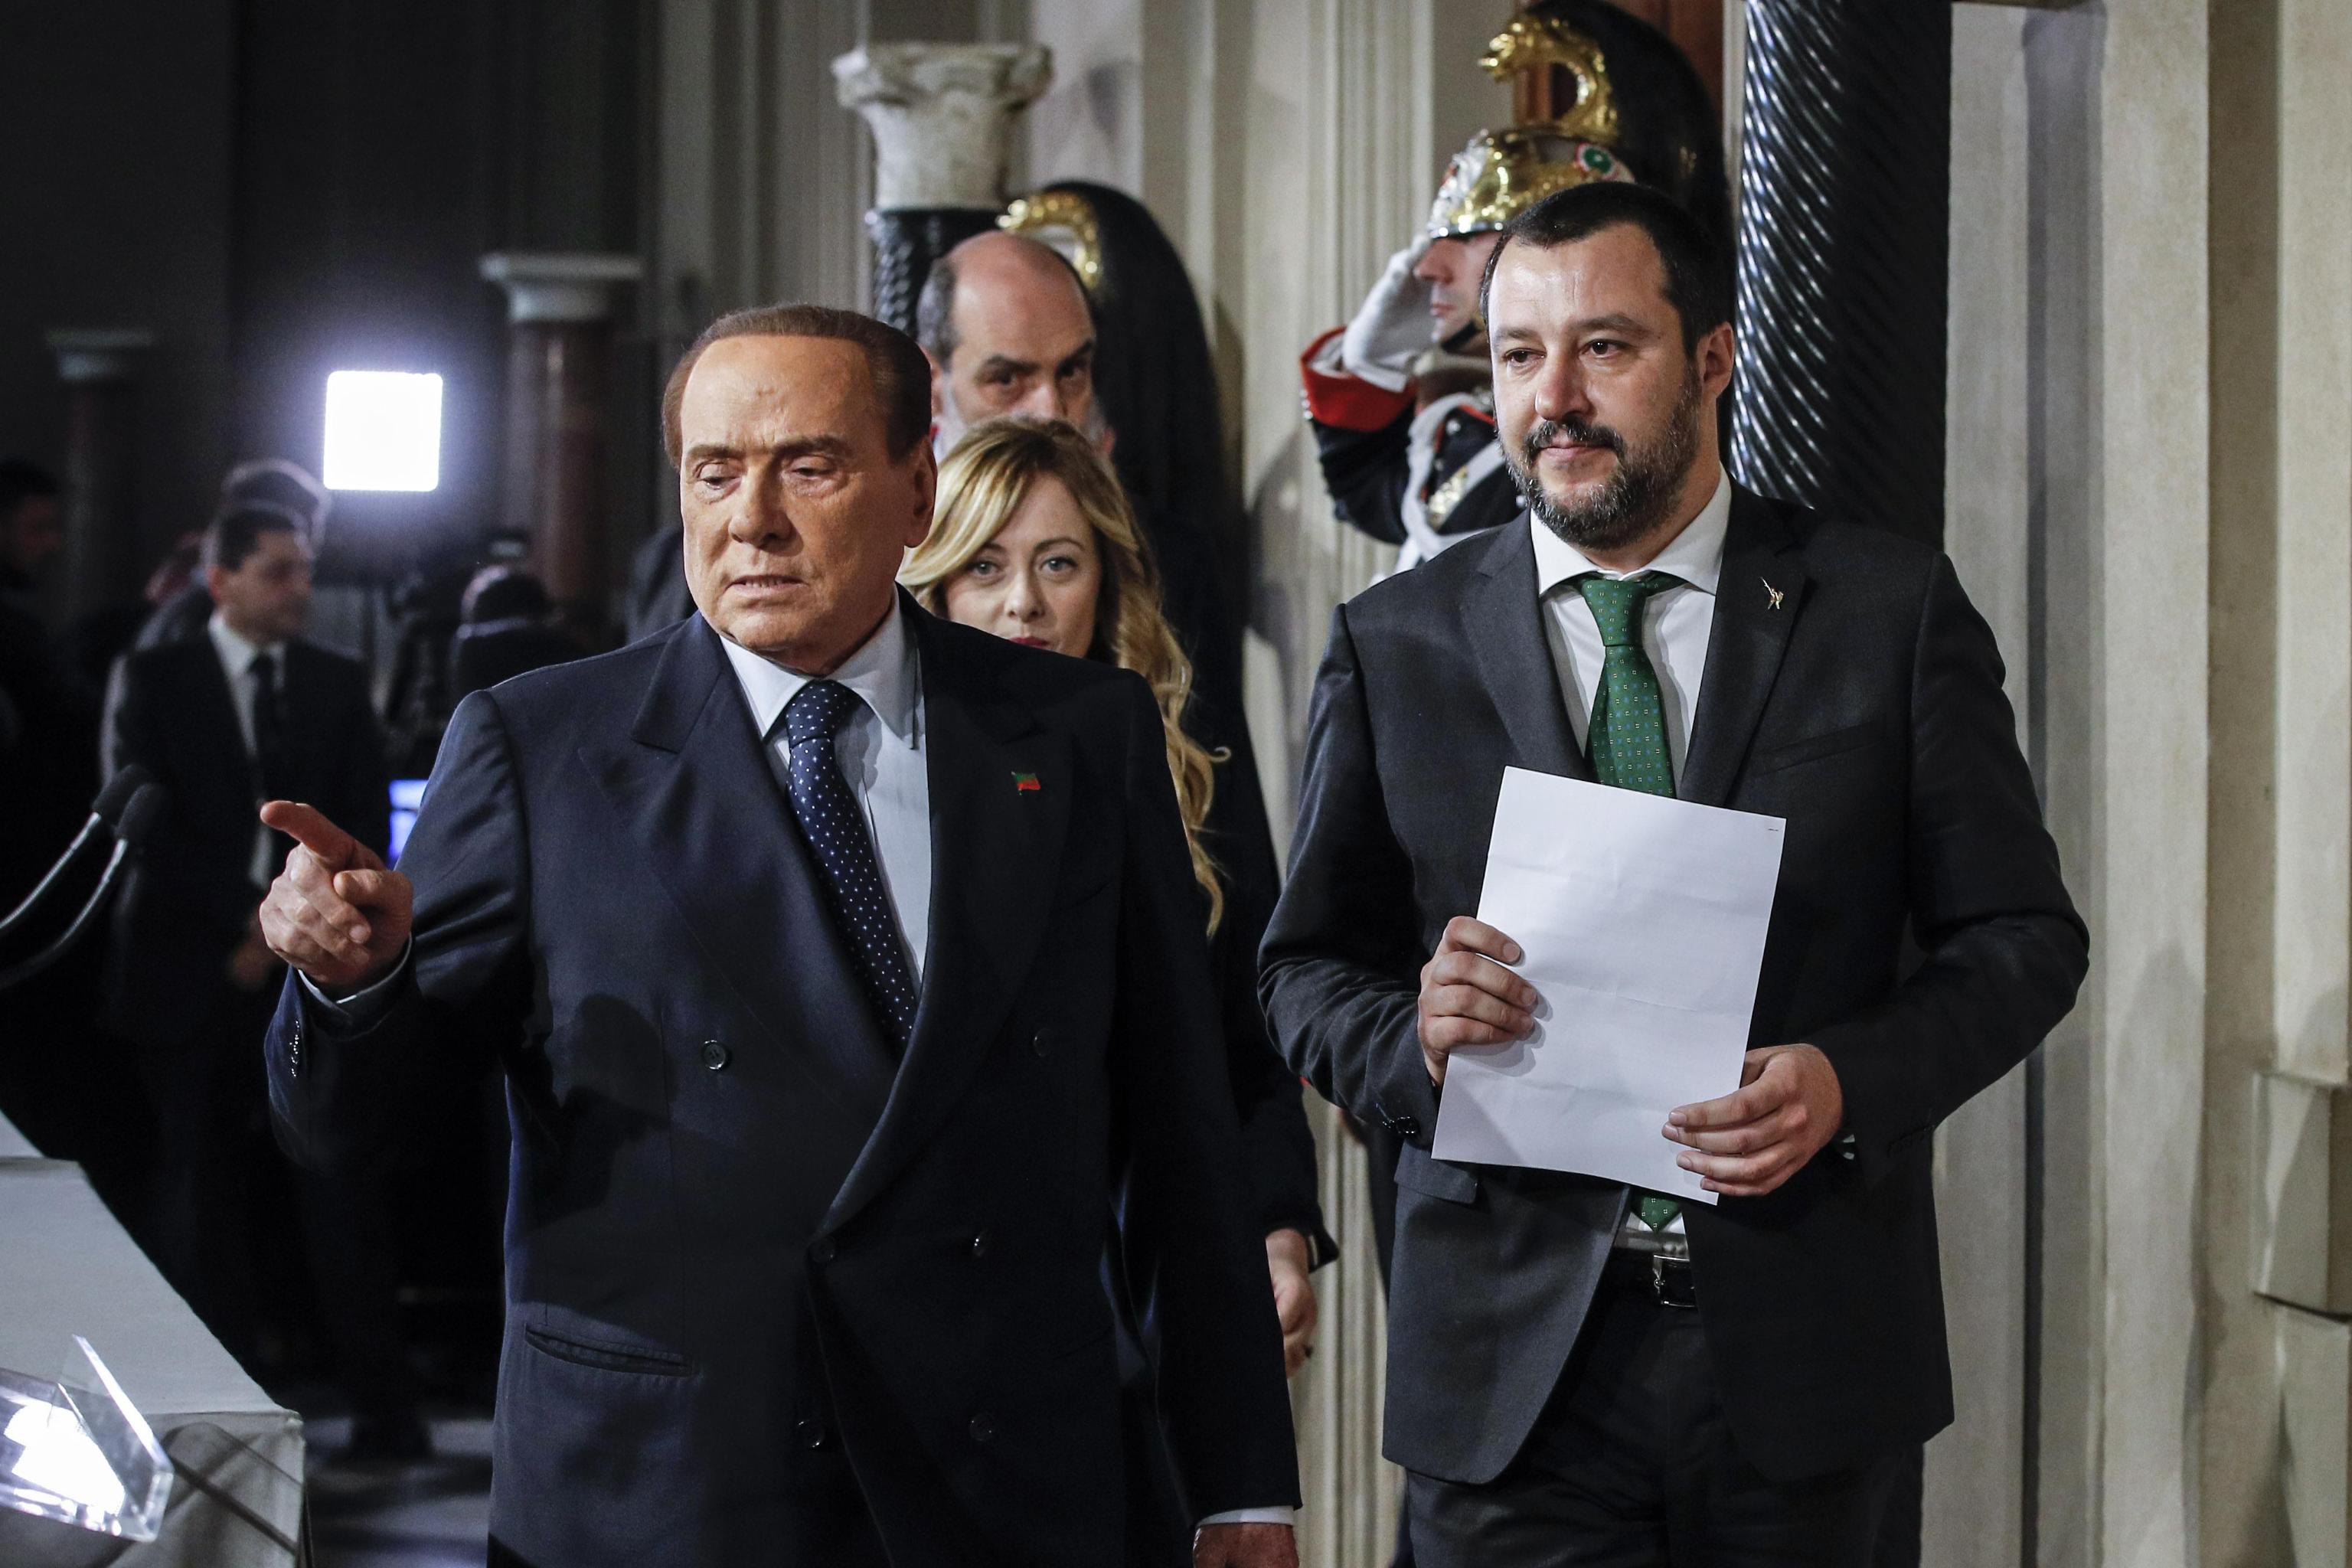 epa06664650 The delegation of centre-right alliance composed by Secretary of Lega party Matteo Salvini (R), President of Fratelli d'Italia party Giorgia Meloni (C) and the leader of Forza Italia party, Silvio Berlusconi (L) addresses the media after a meeting with Italian President Mattarella for a second round of formal political consultations following the general elections, in Rome, Italy, 12 April 2018. Mattarella is holding another round of formal political consultations following the 04 March general election in order to make a decision on to whom to give a mandate to form a new government.  EPA/GIUSEPPE LAMI  EPA-EFE/GIUSEPPE LAMI